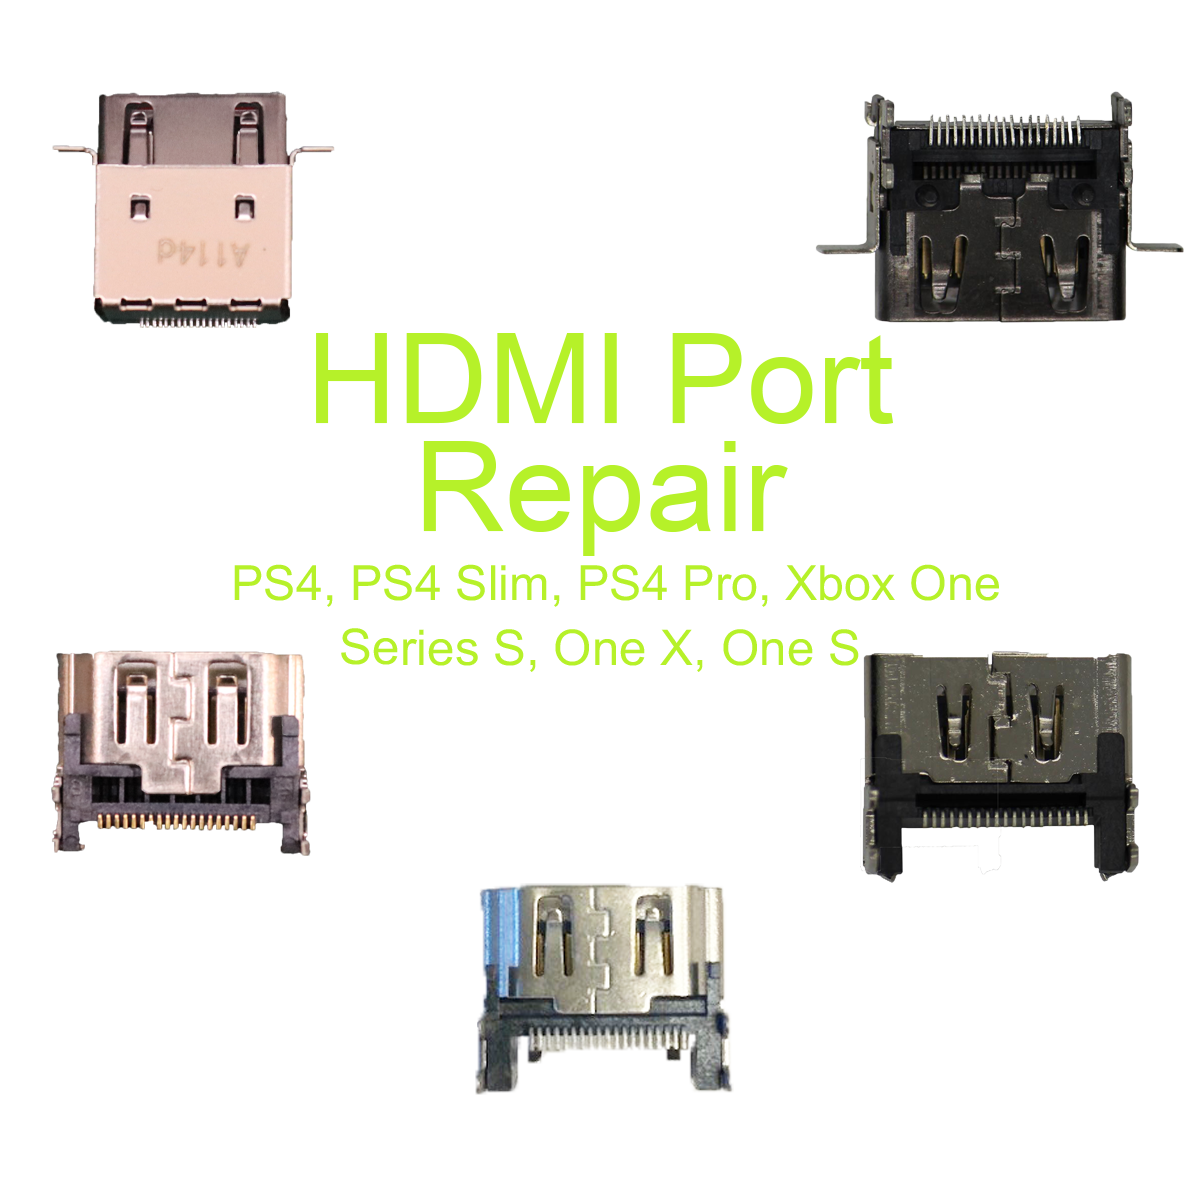 PS4, PS4 Slim, PS4 Xbox One, Series S, One X, One S HDMI Port Repair